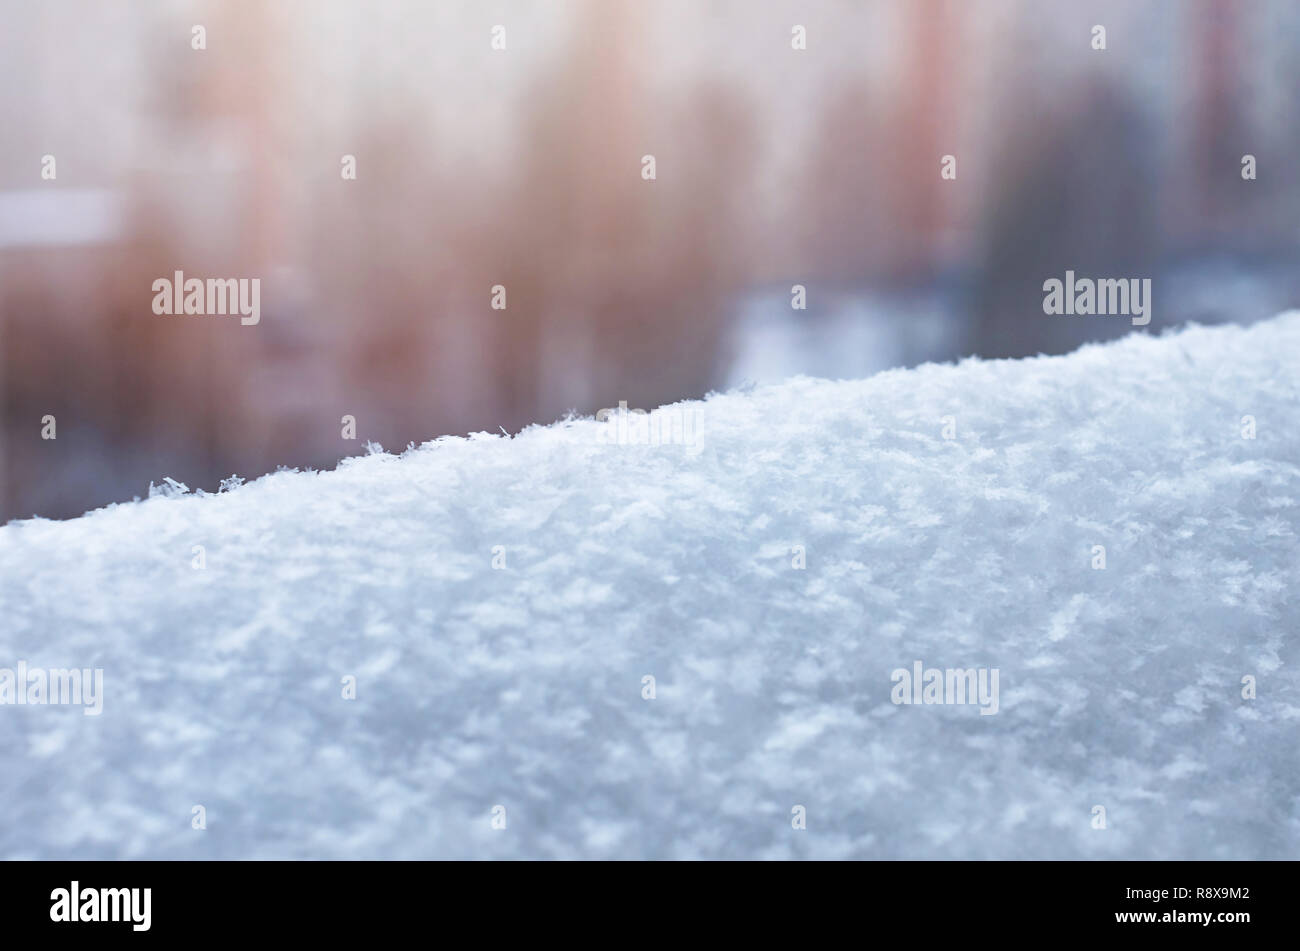 A Snowdrift with Snowflakes on a Blurred Apartment Building Background. Winter Season, Weather Forecast, Climate Change Image. Stock Photo